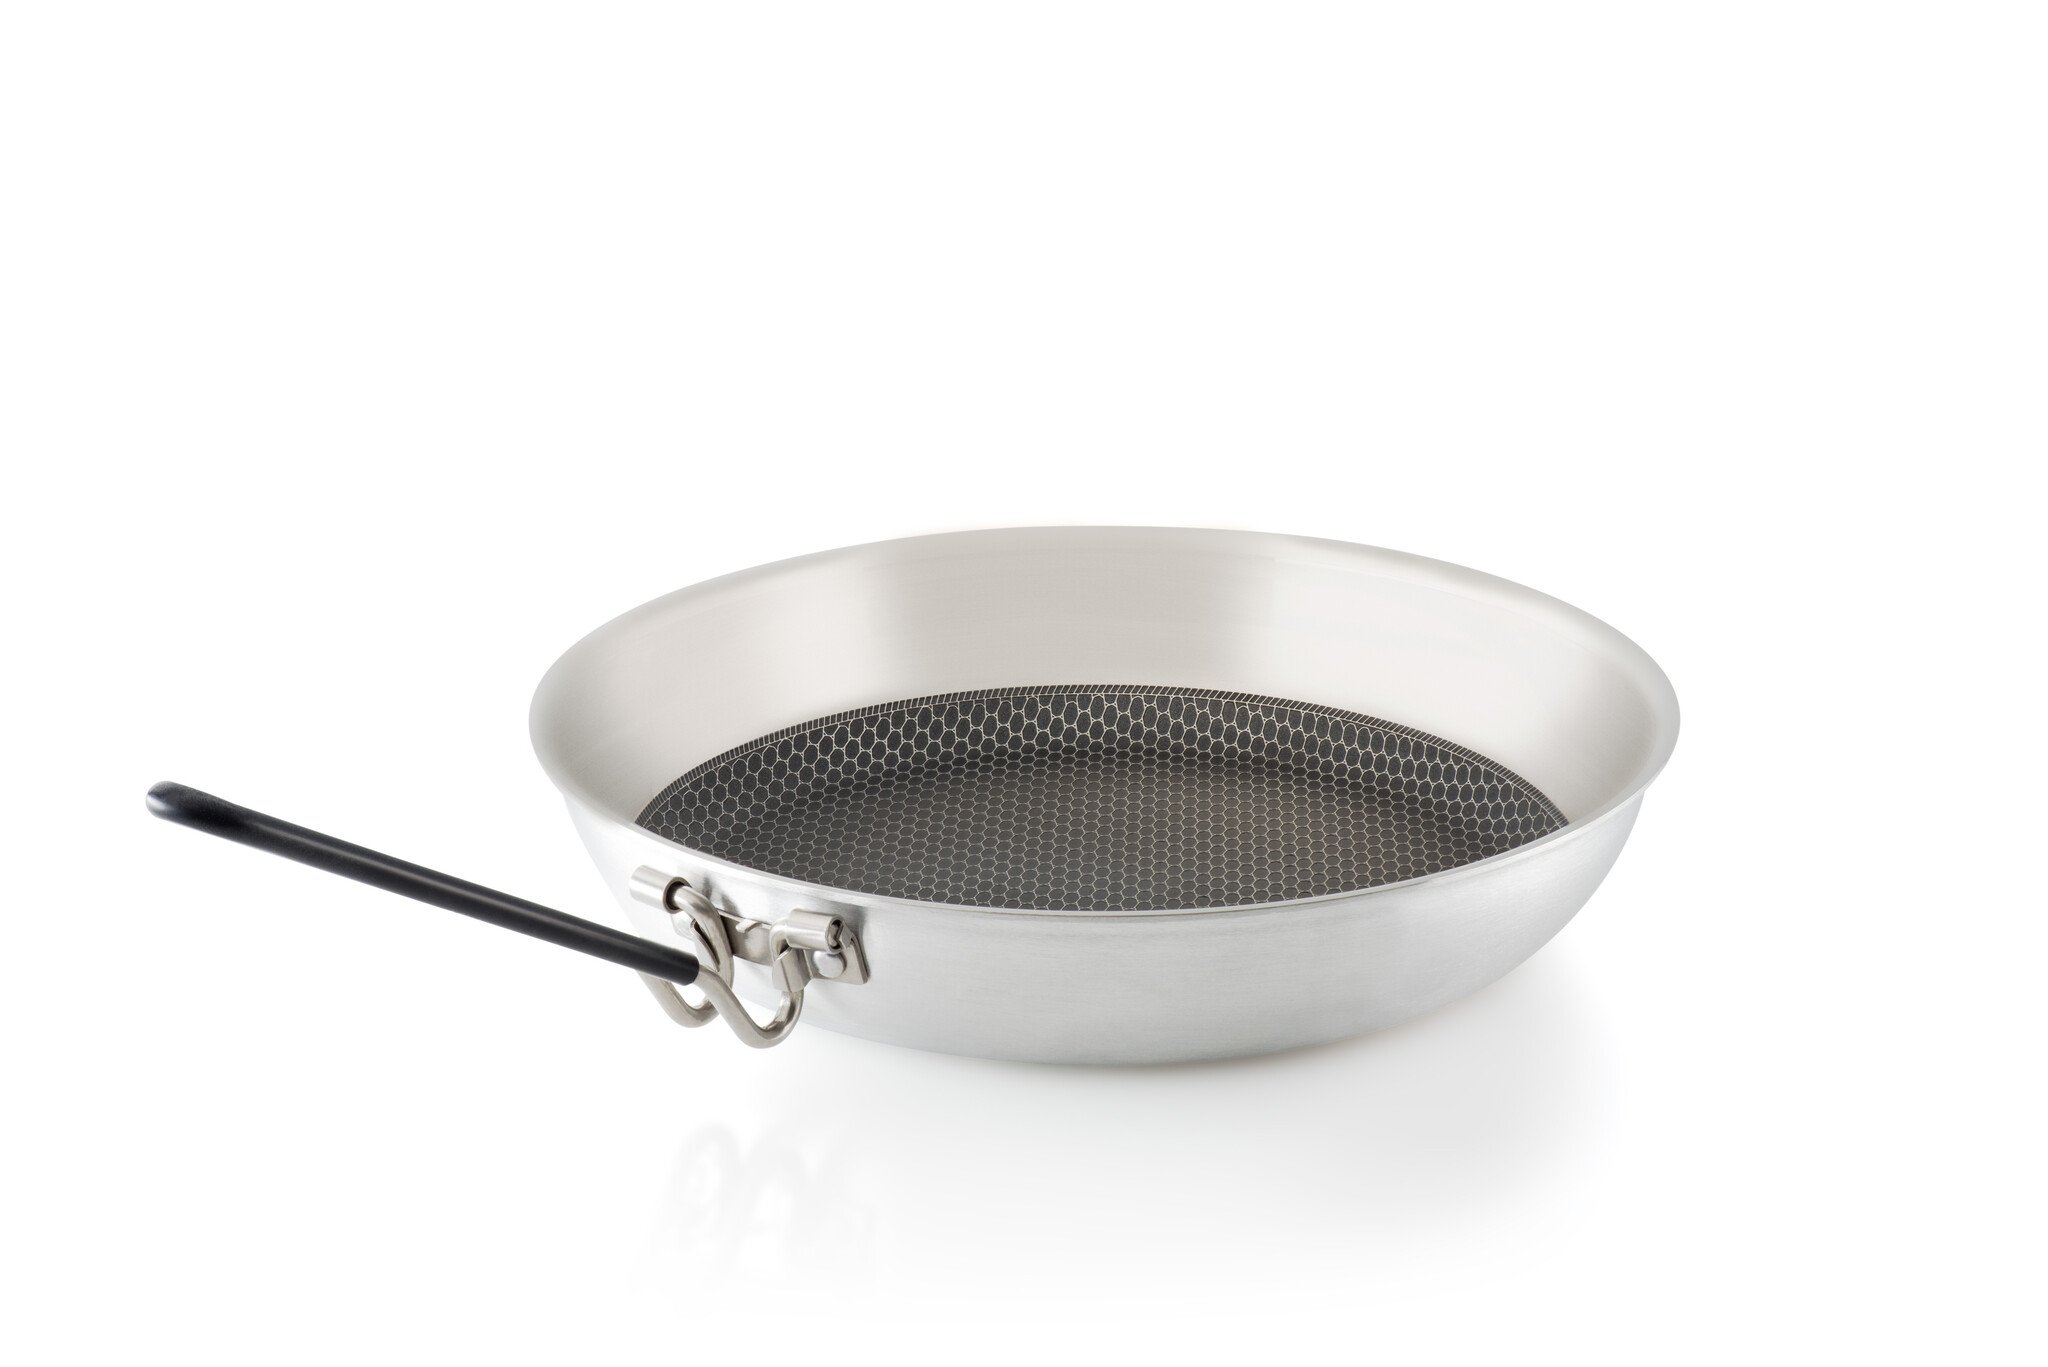 GSI Outdoors GLACIER STAINLESS STEEL Frypan - 10